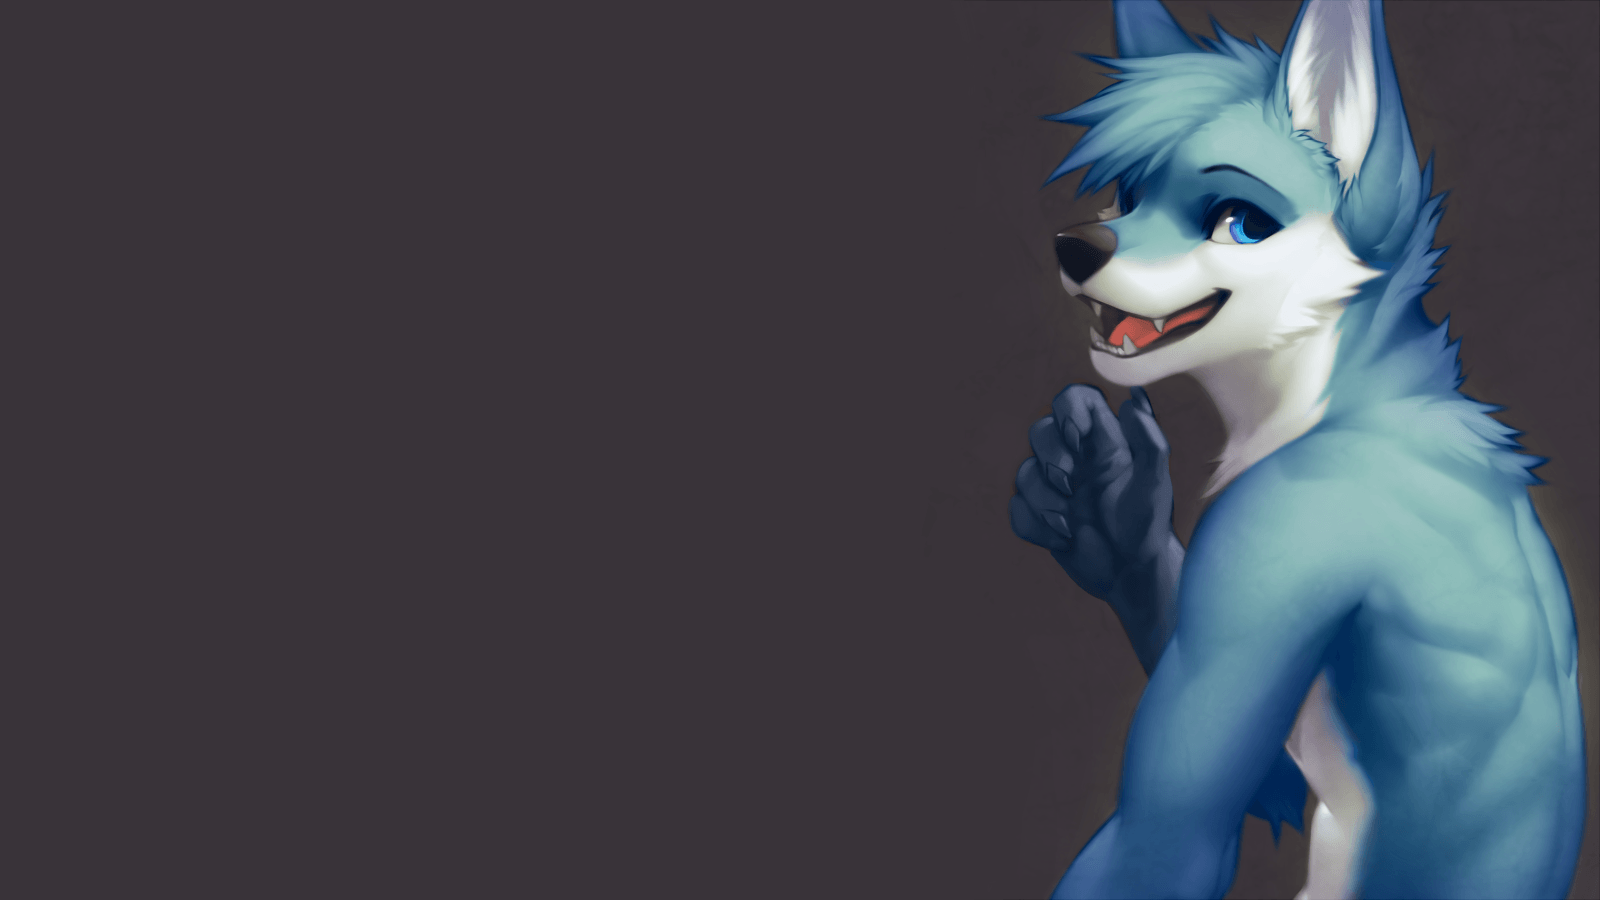 Hd Furry Wallpapers